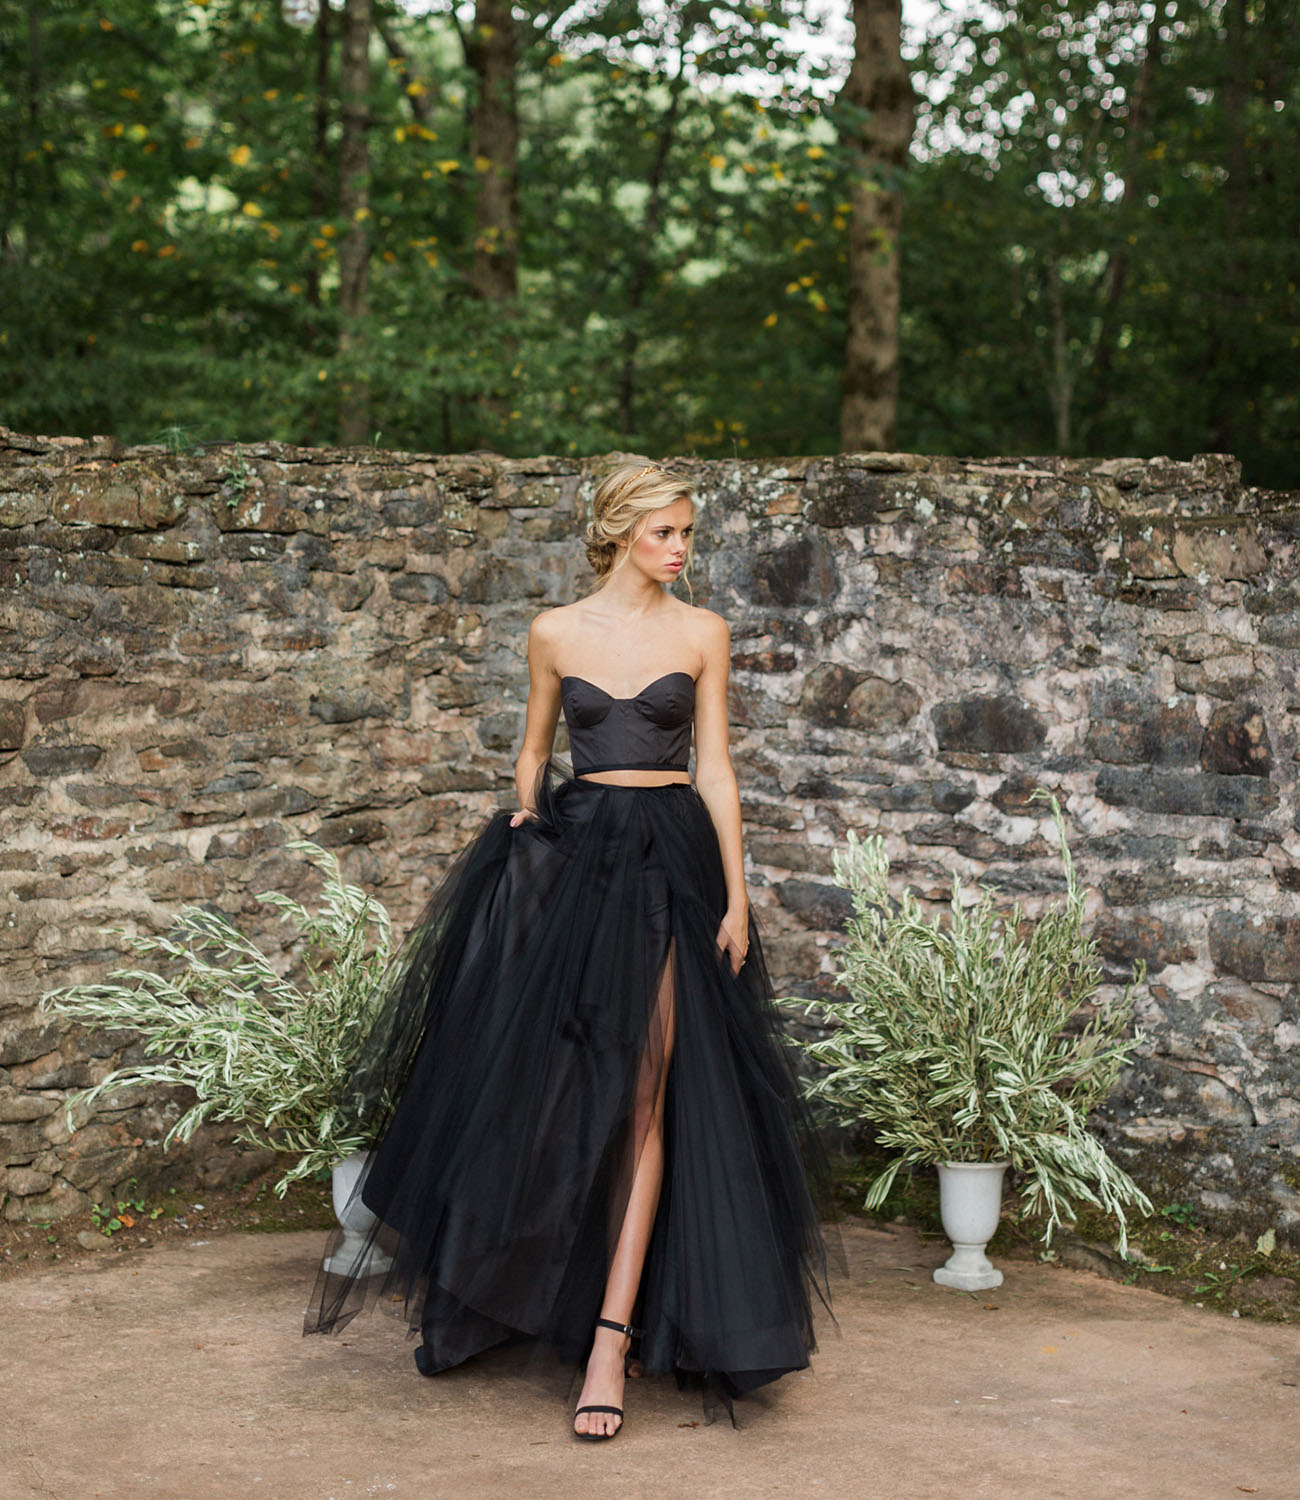 Fall Gothic Bridal Inspiration with a Black Gown